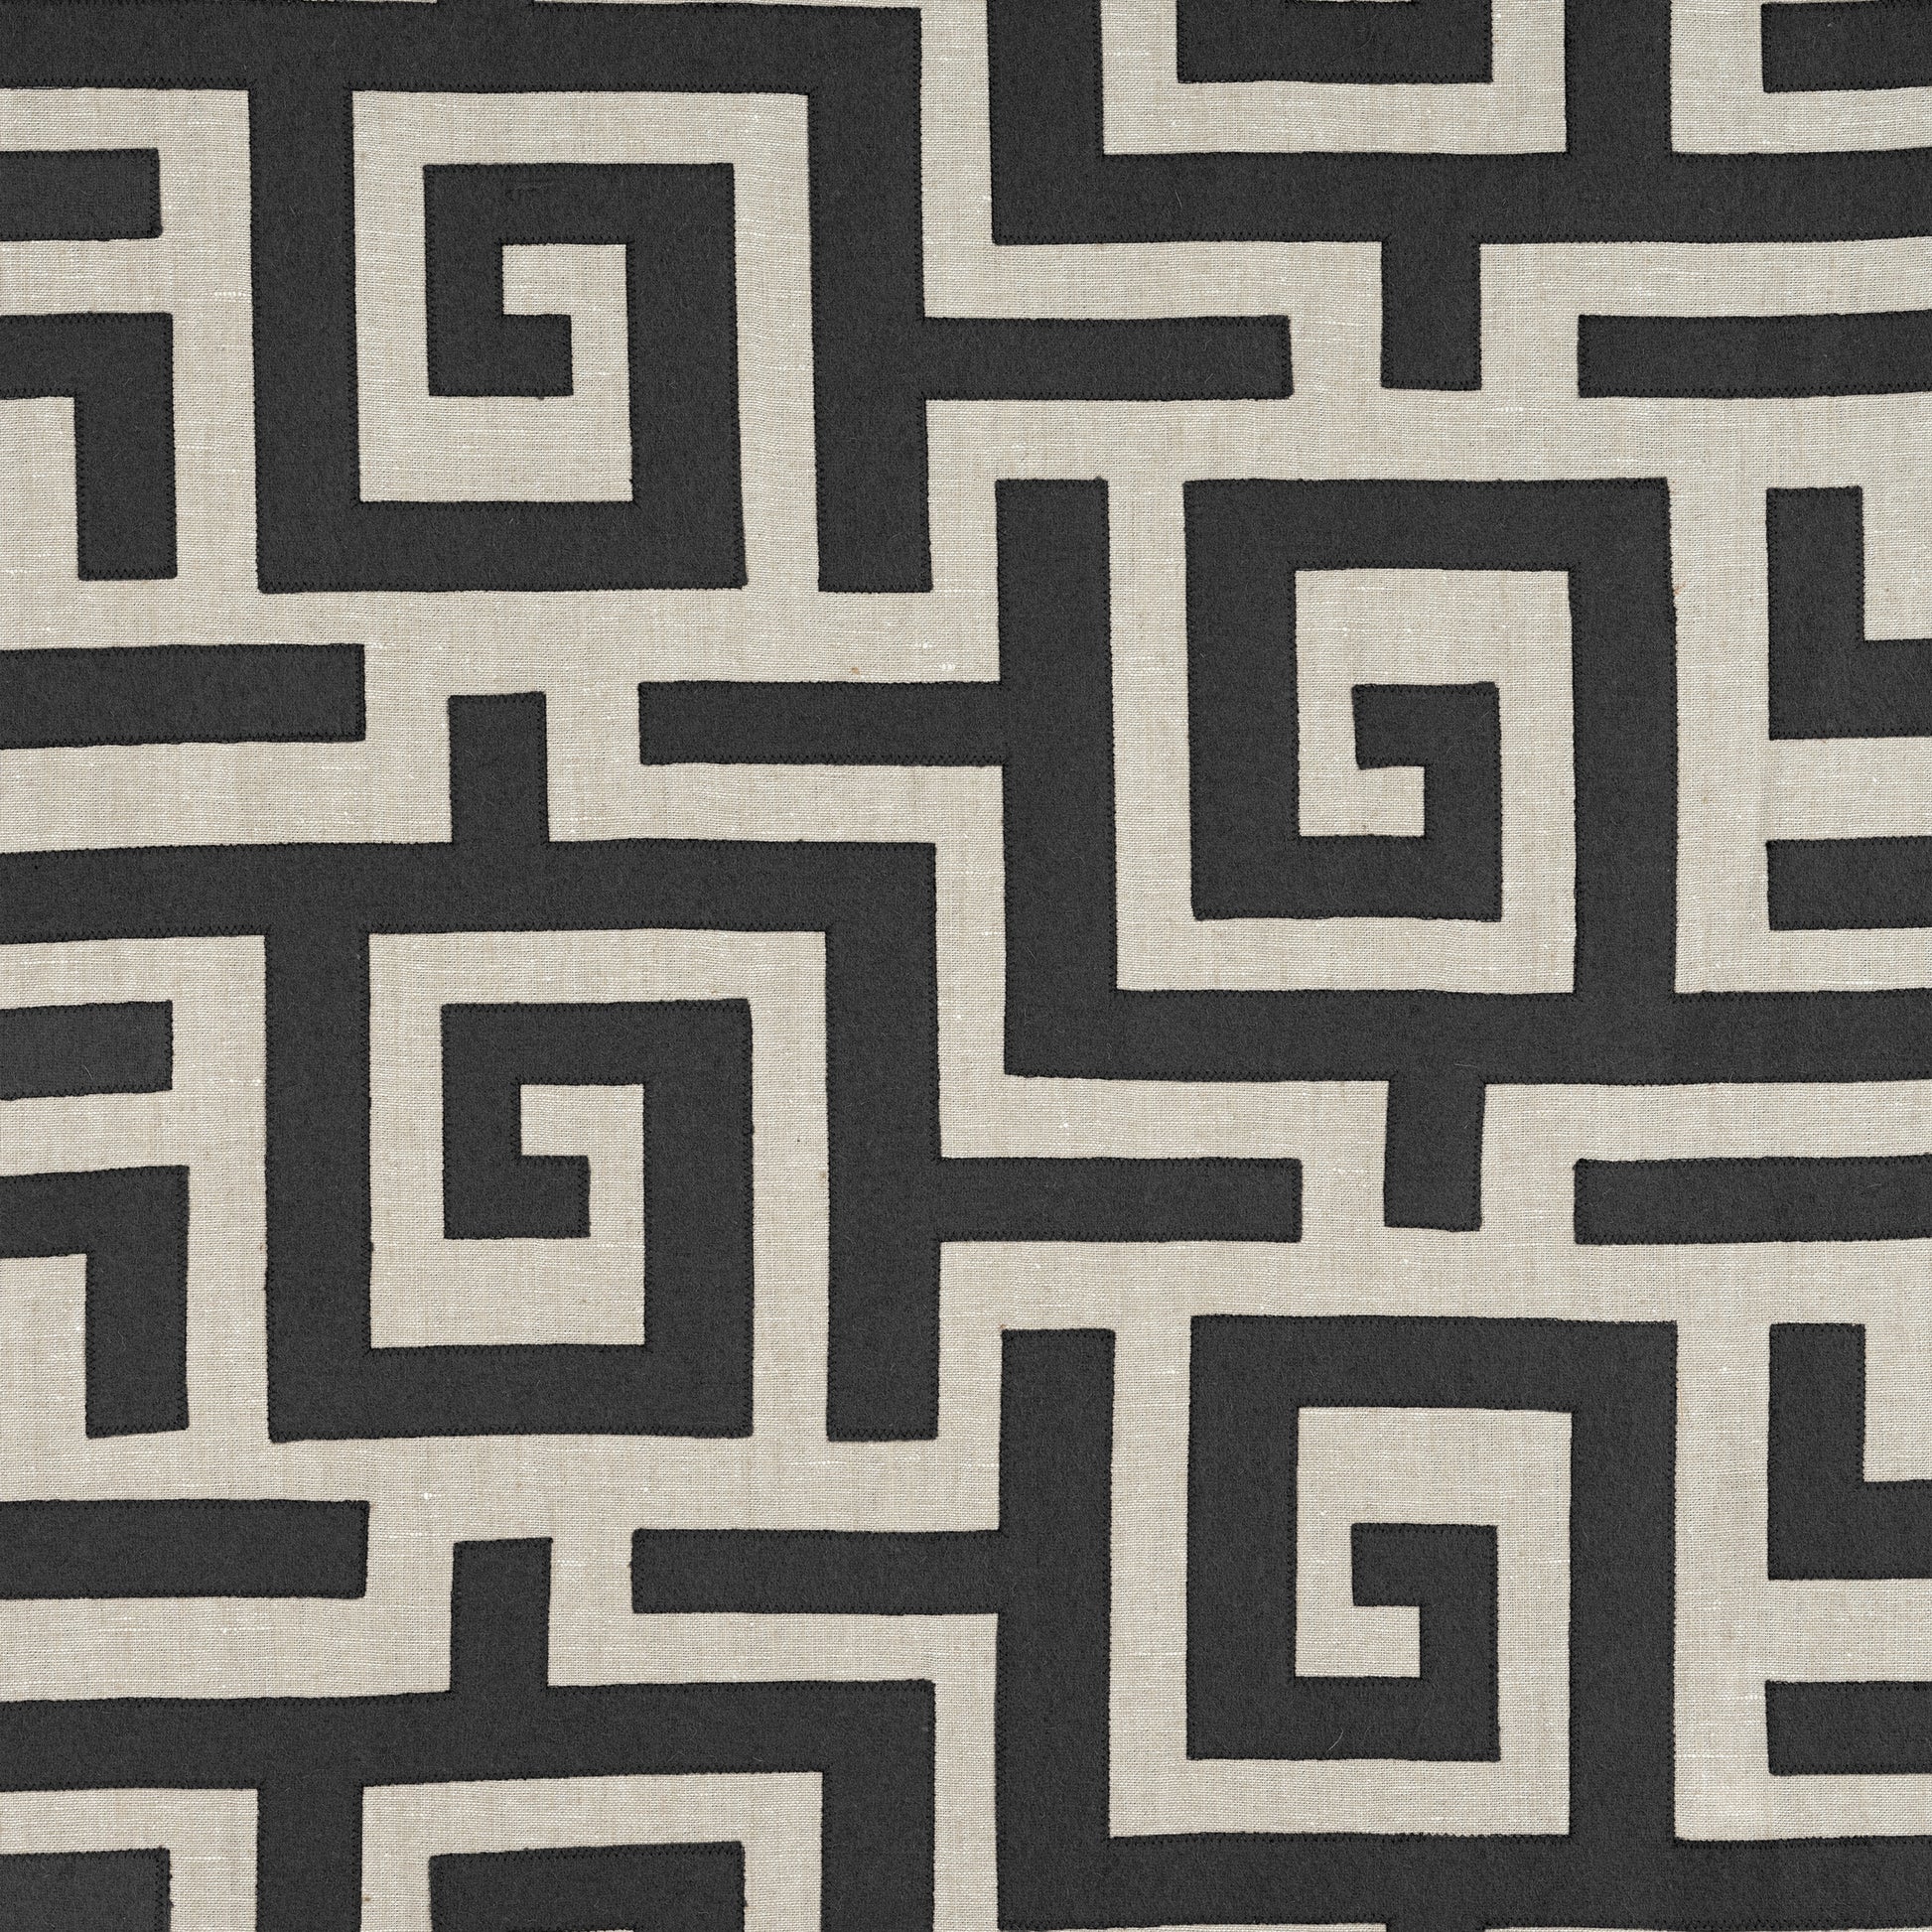 Purchase Thibaut Fabric SKU# W713221 pattern name Tulum Applique color Black on Natural